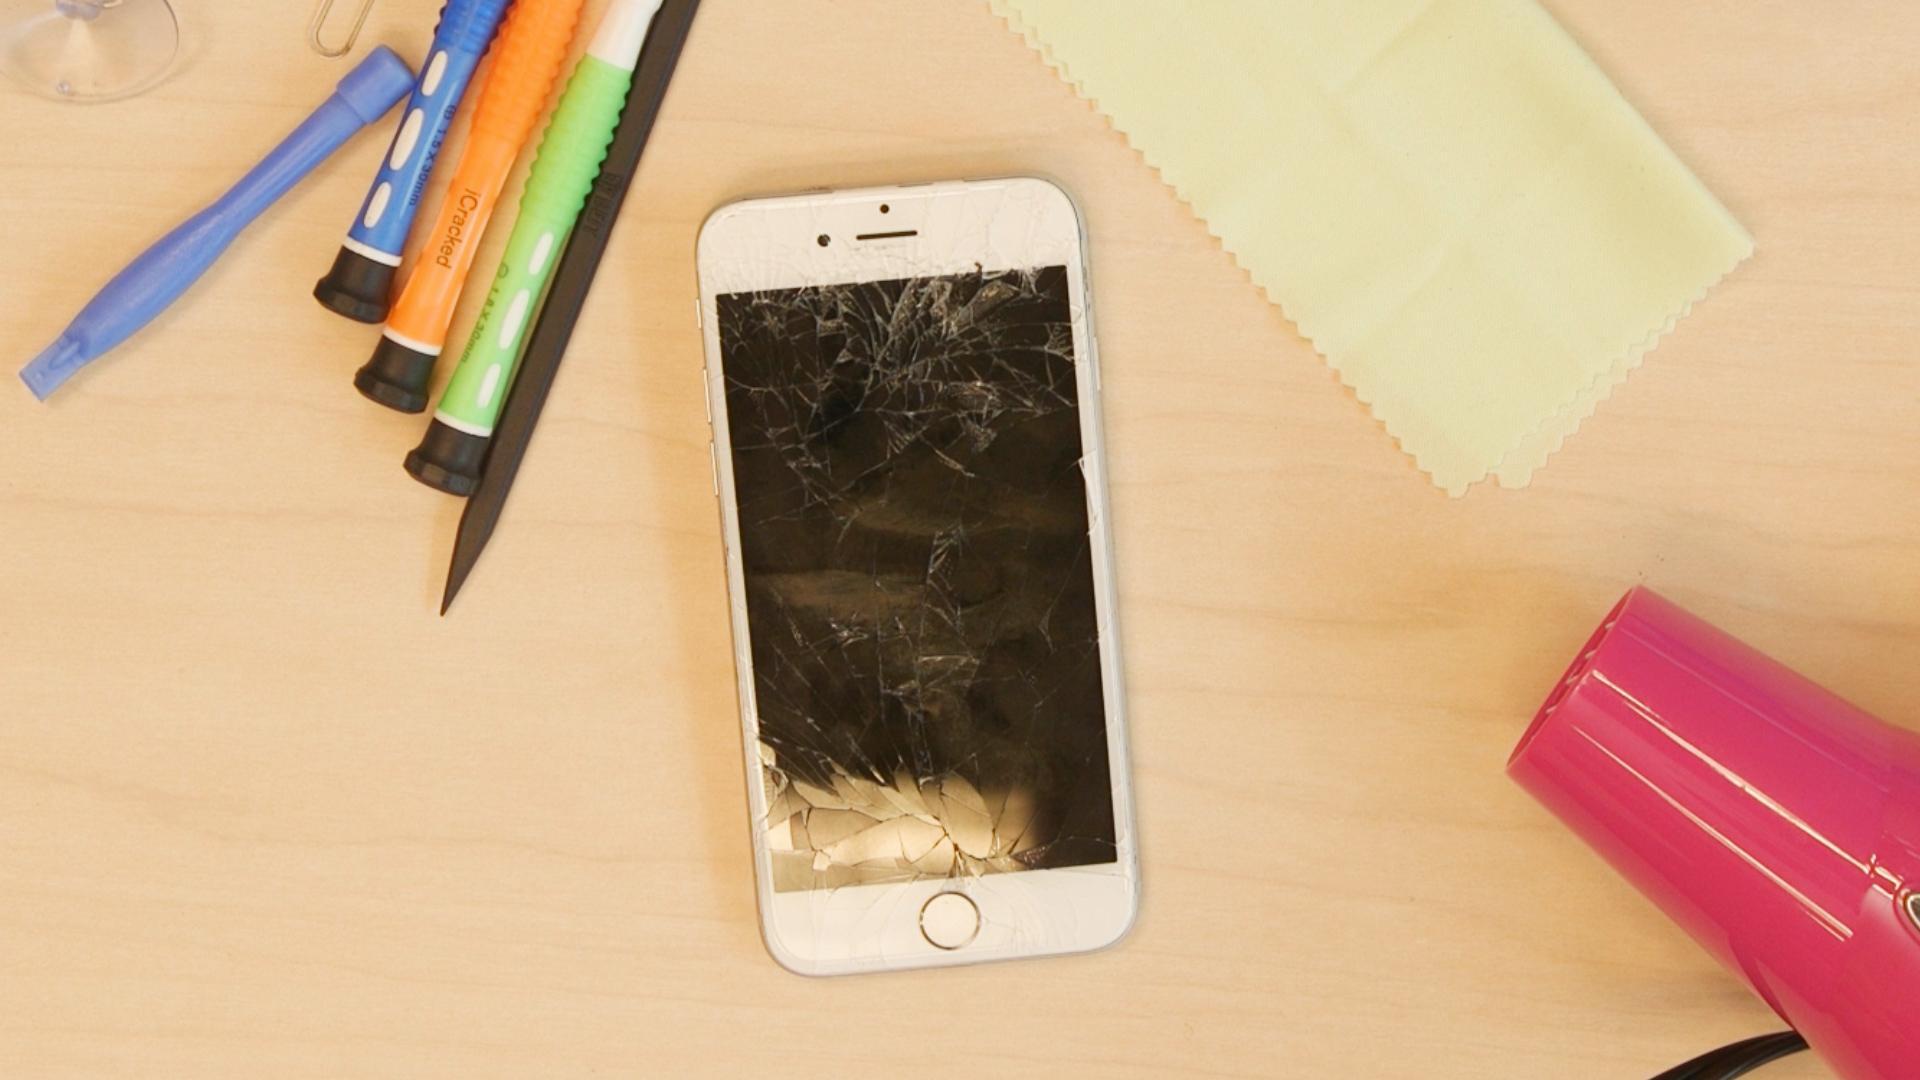 Using iPhone Screen Replacement Kits - Consumer Reports